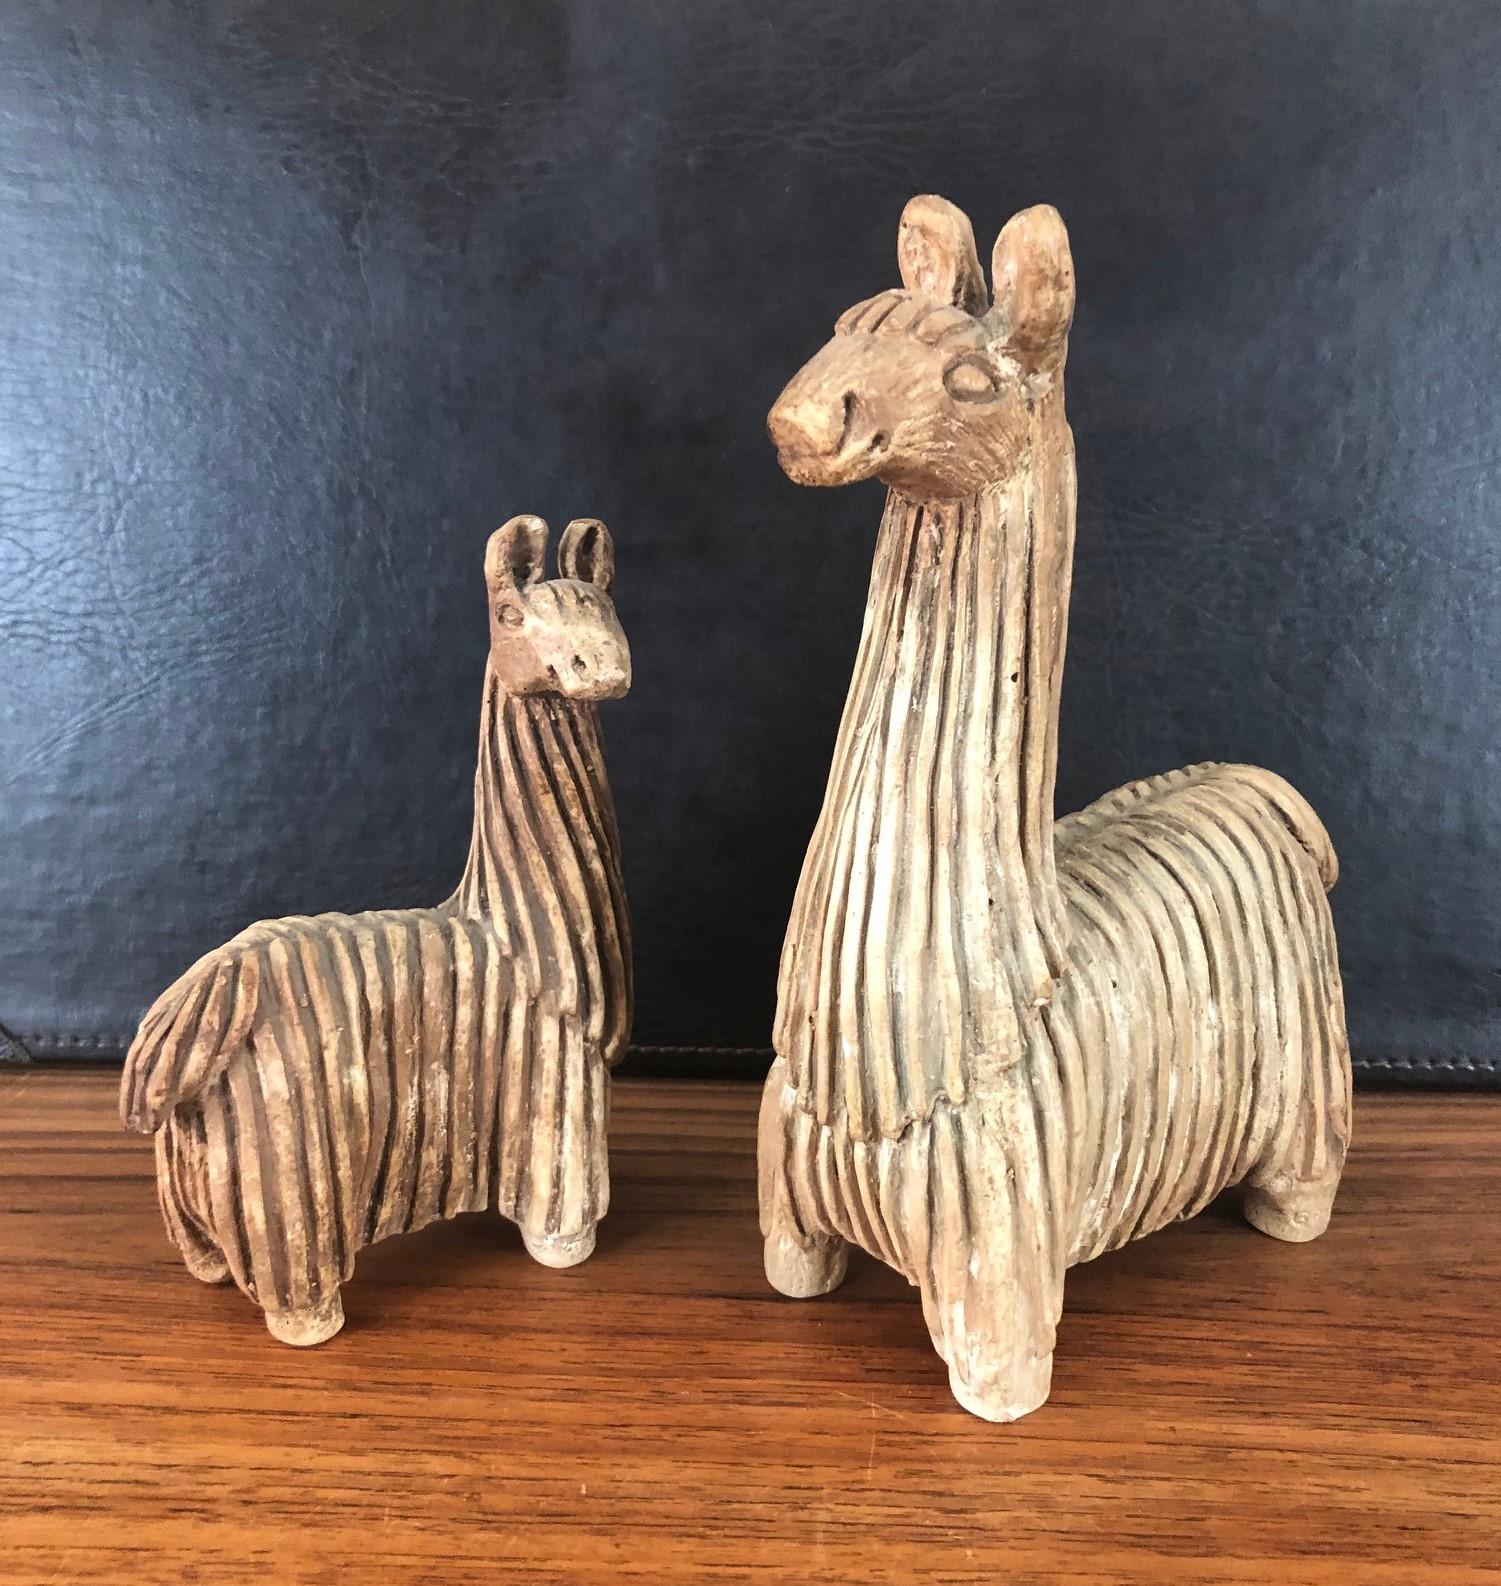 A very cool pair of midcentury stoneware llamas by Fabbri Art Co. of San Francisco, circa 1970s. Mother and baby llama have been beautifully sculpted with deep striking texture and glazed to bring them to a rich deep beige color.

Mother stands